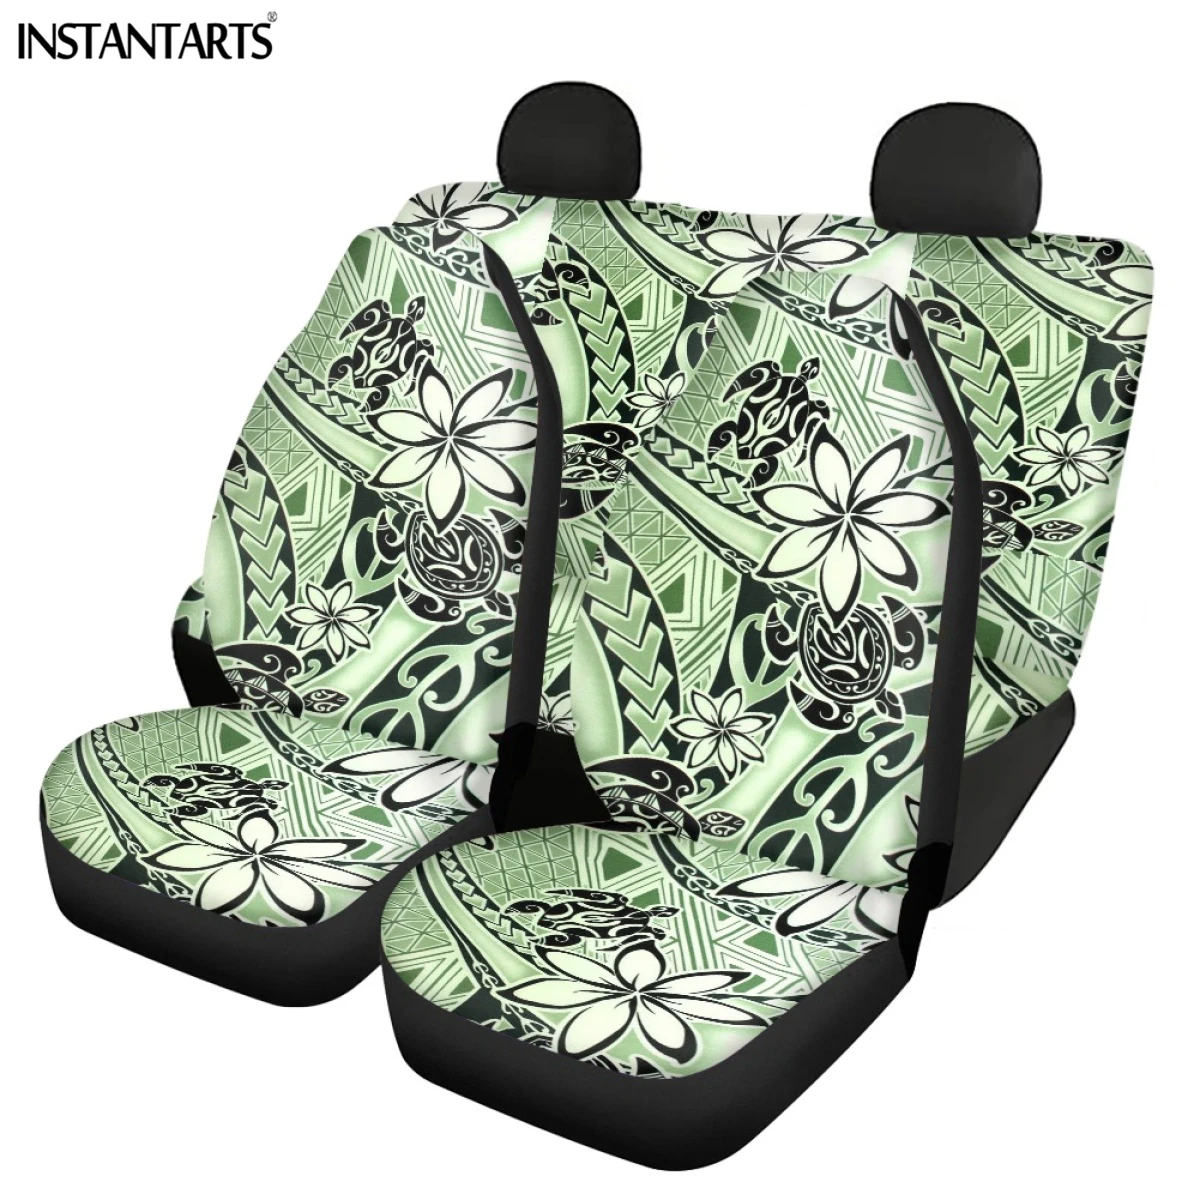 

INSTANTARTS New Trend Car Interior Decor Polynesian Tribal Pattern Front and Back Car Seat Cushion Comfort Vehicle Seat Covers